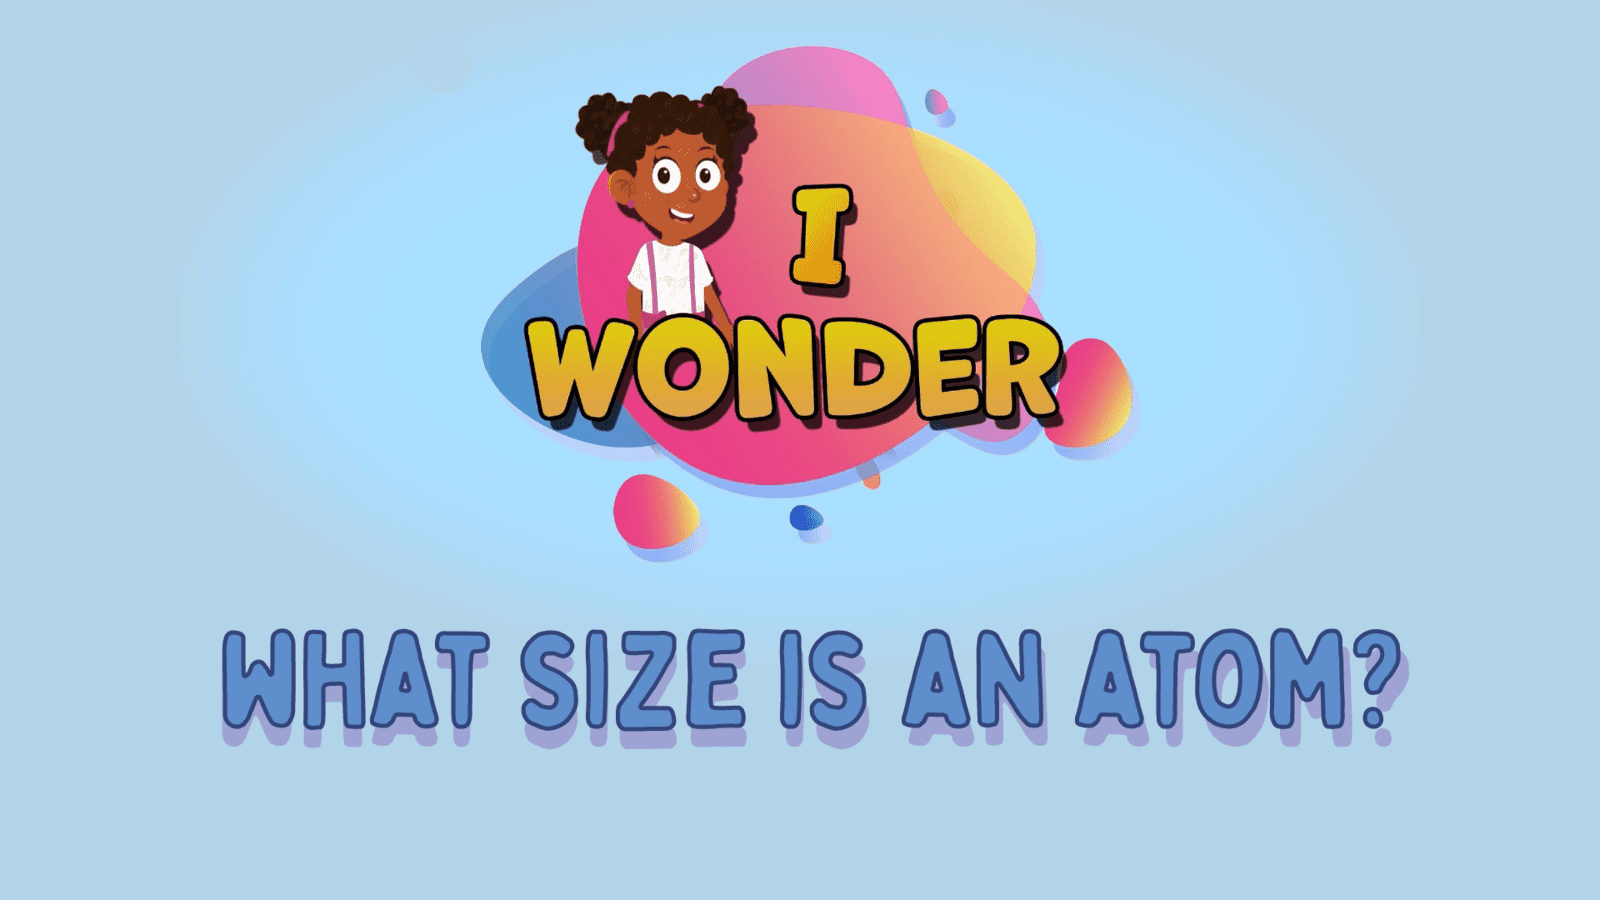 What Size Is An Atom?